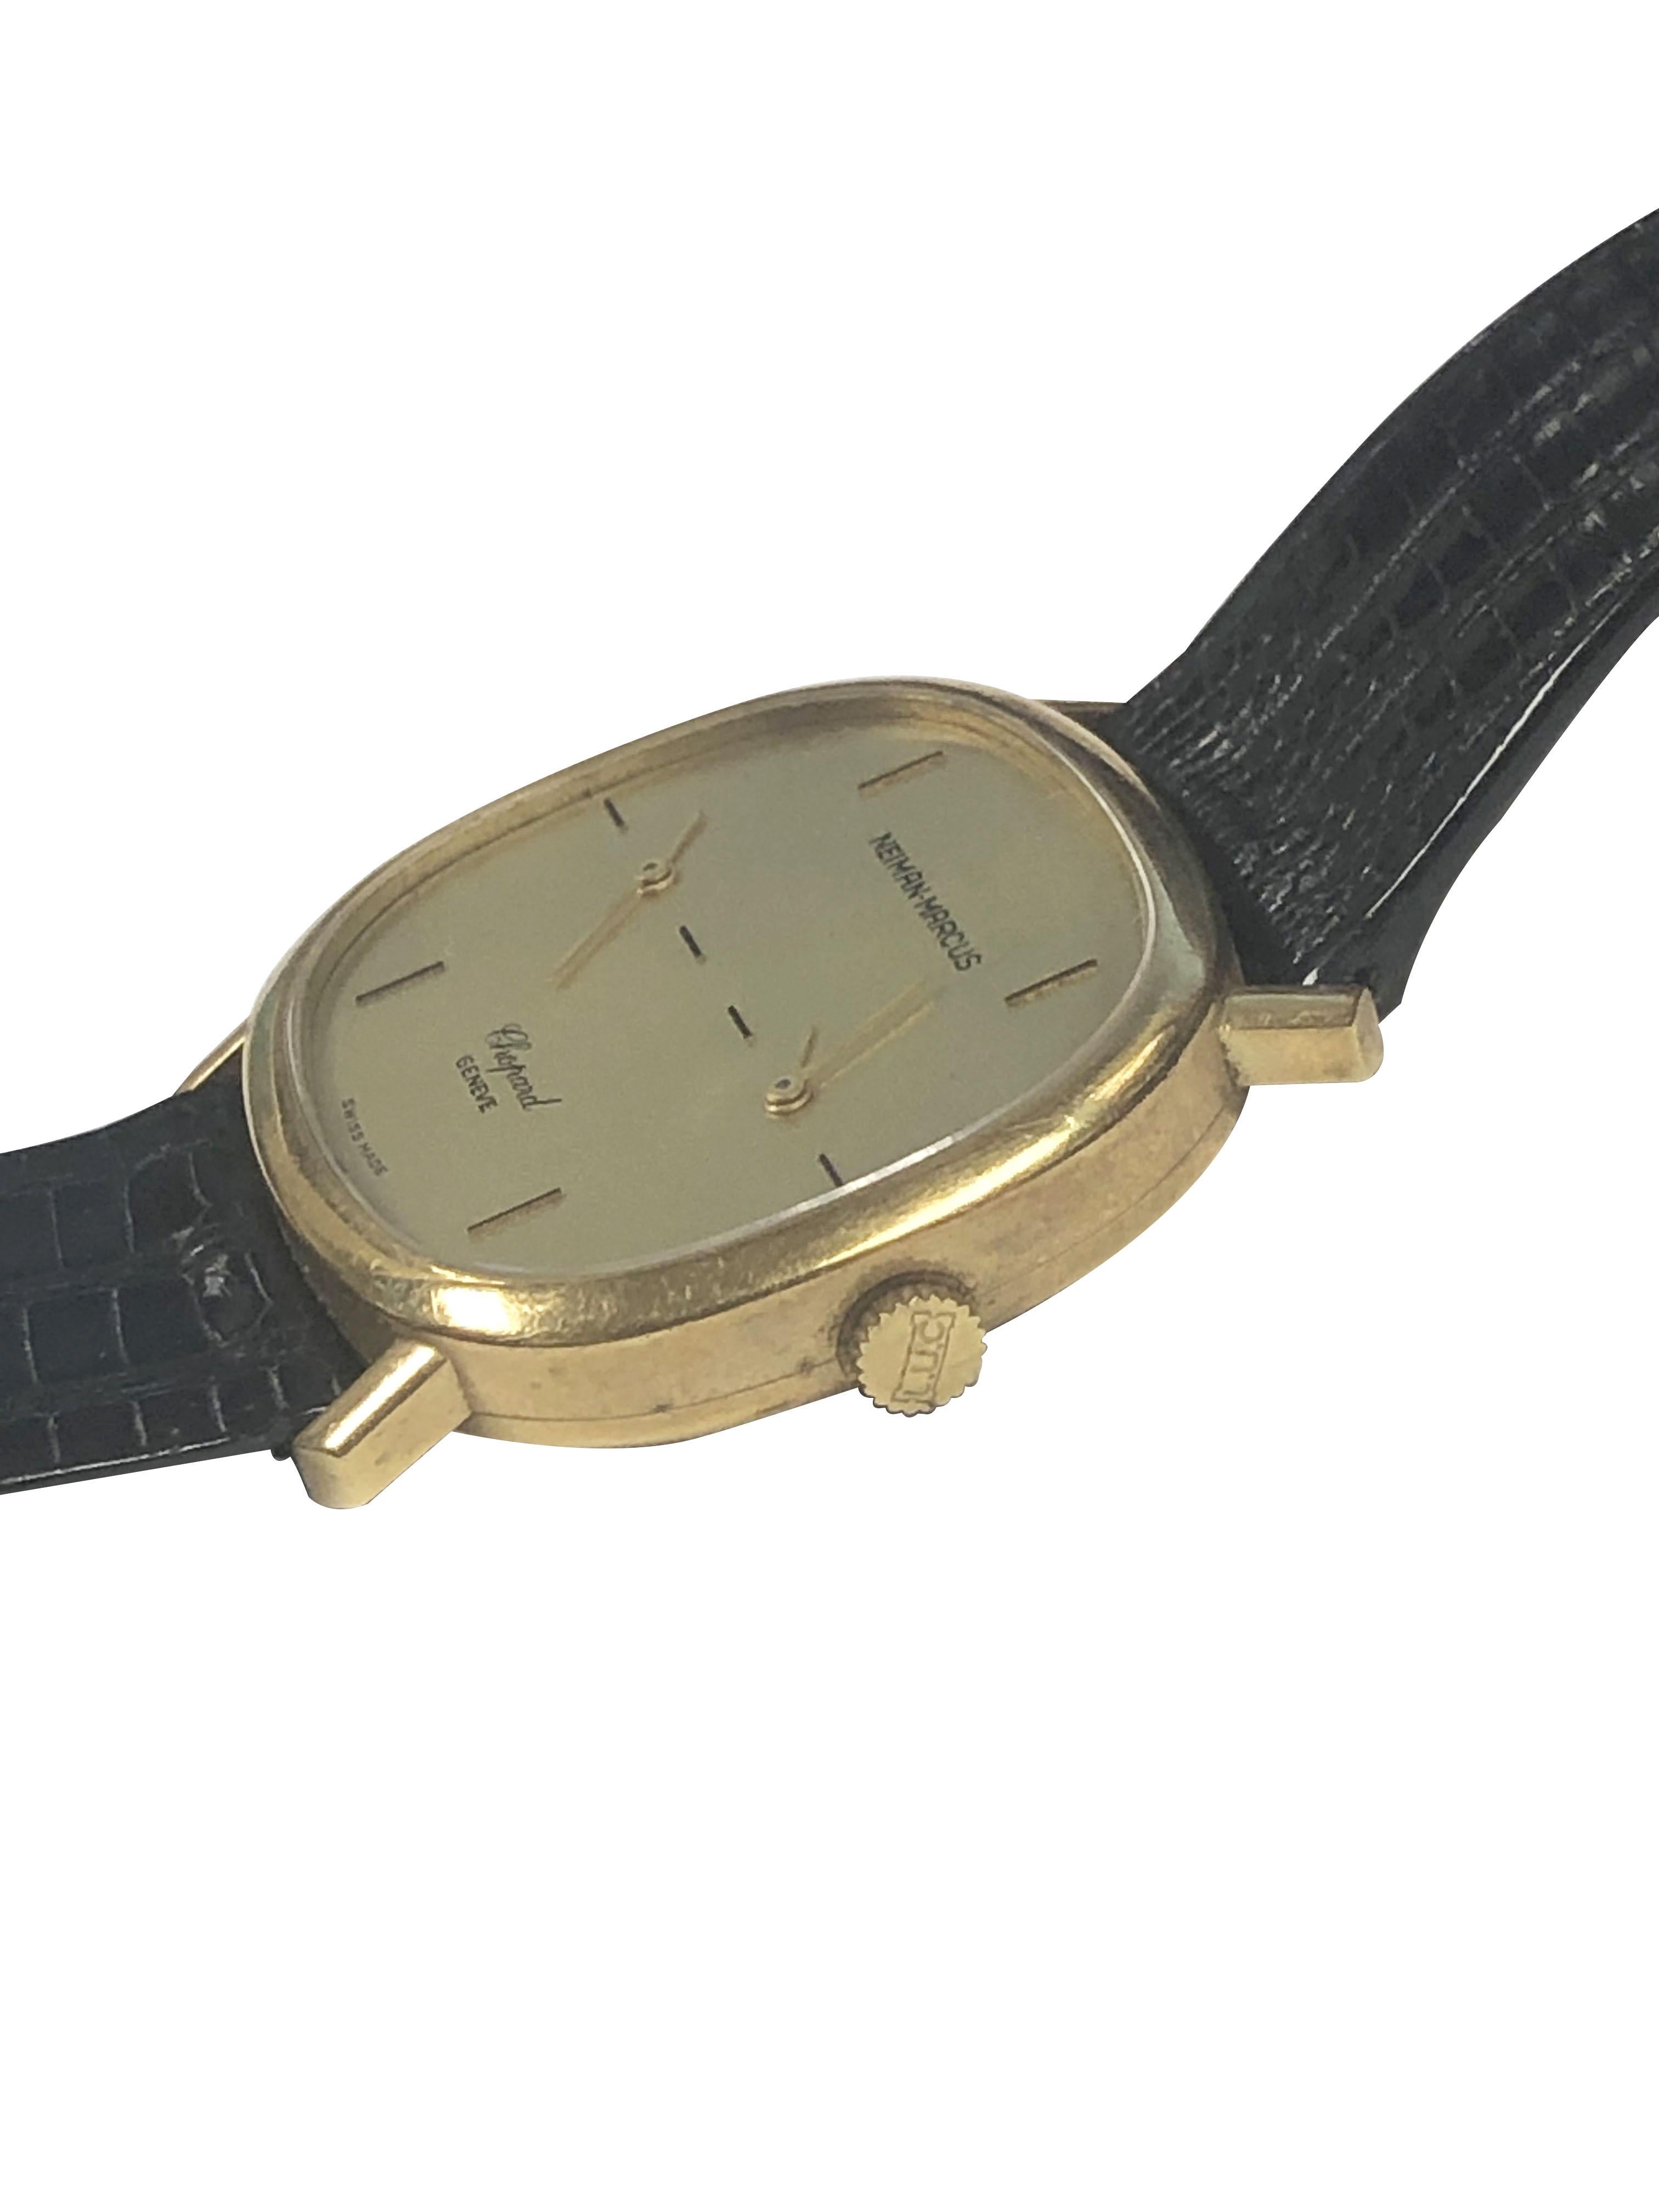 Circa 1980 Chopard, retailed by Neiman Marcus, Duel Time Zone Wrist Watch, 33 X 29 M.M. 18K Yellow Gold 2 piece case, 2 17 jewel mechanical, manual wind movement, Gold dial with Gold hands. original period Lizard Strap with Gold plate Chopard